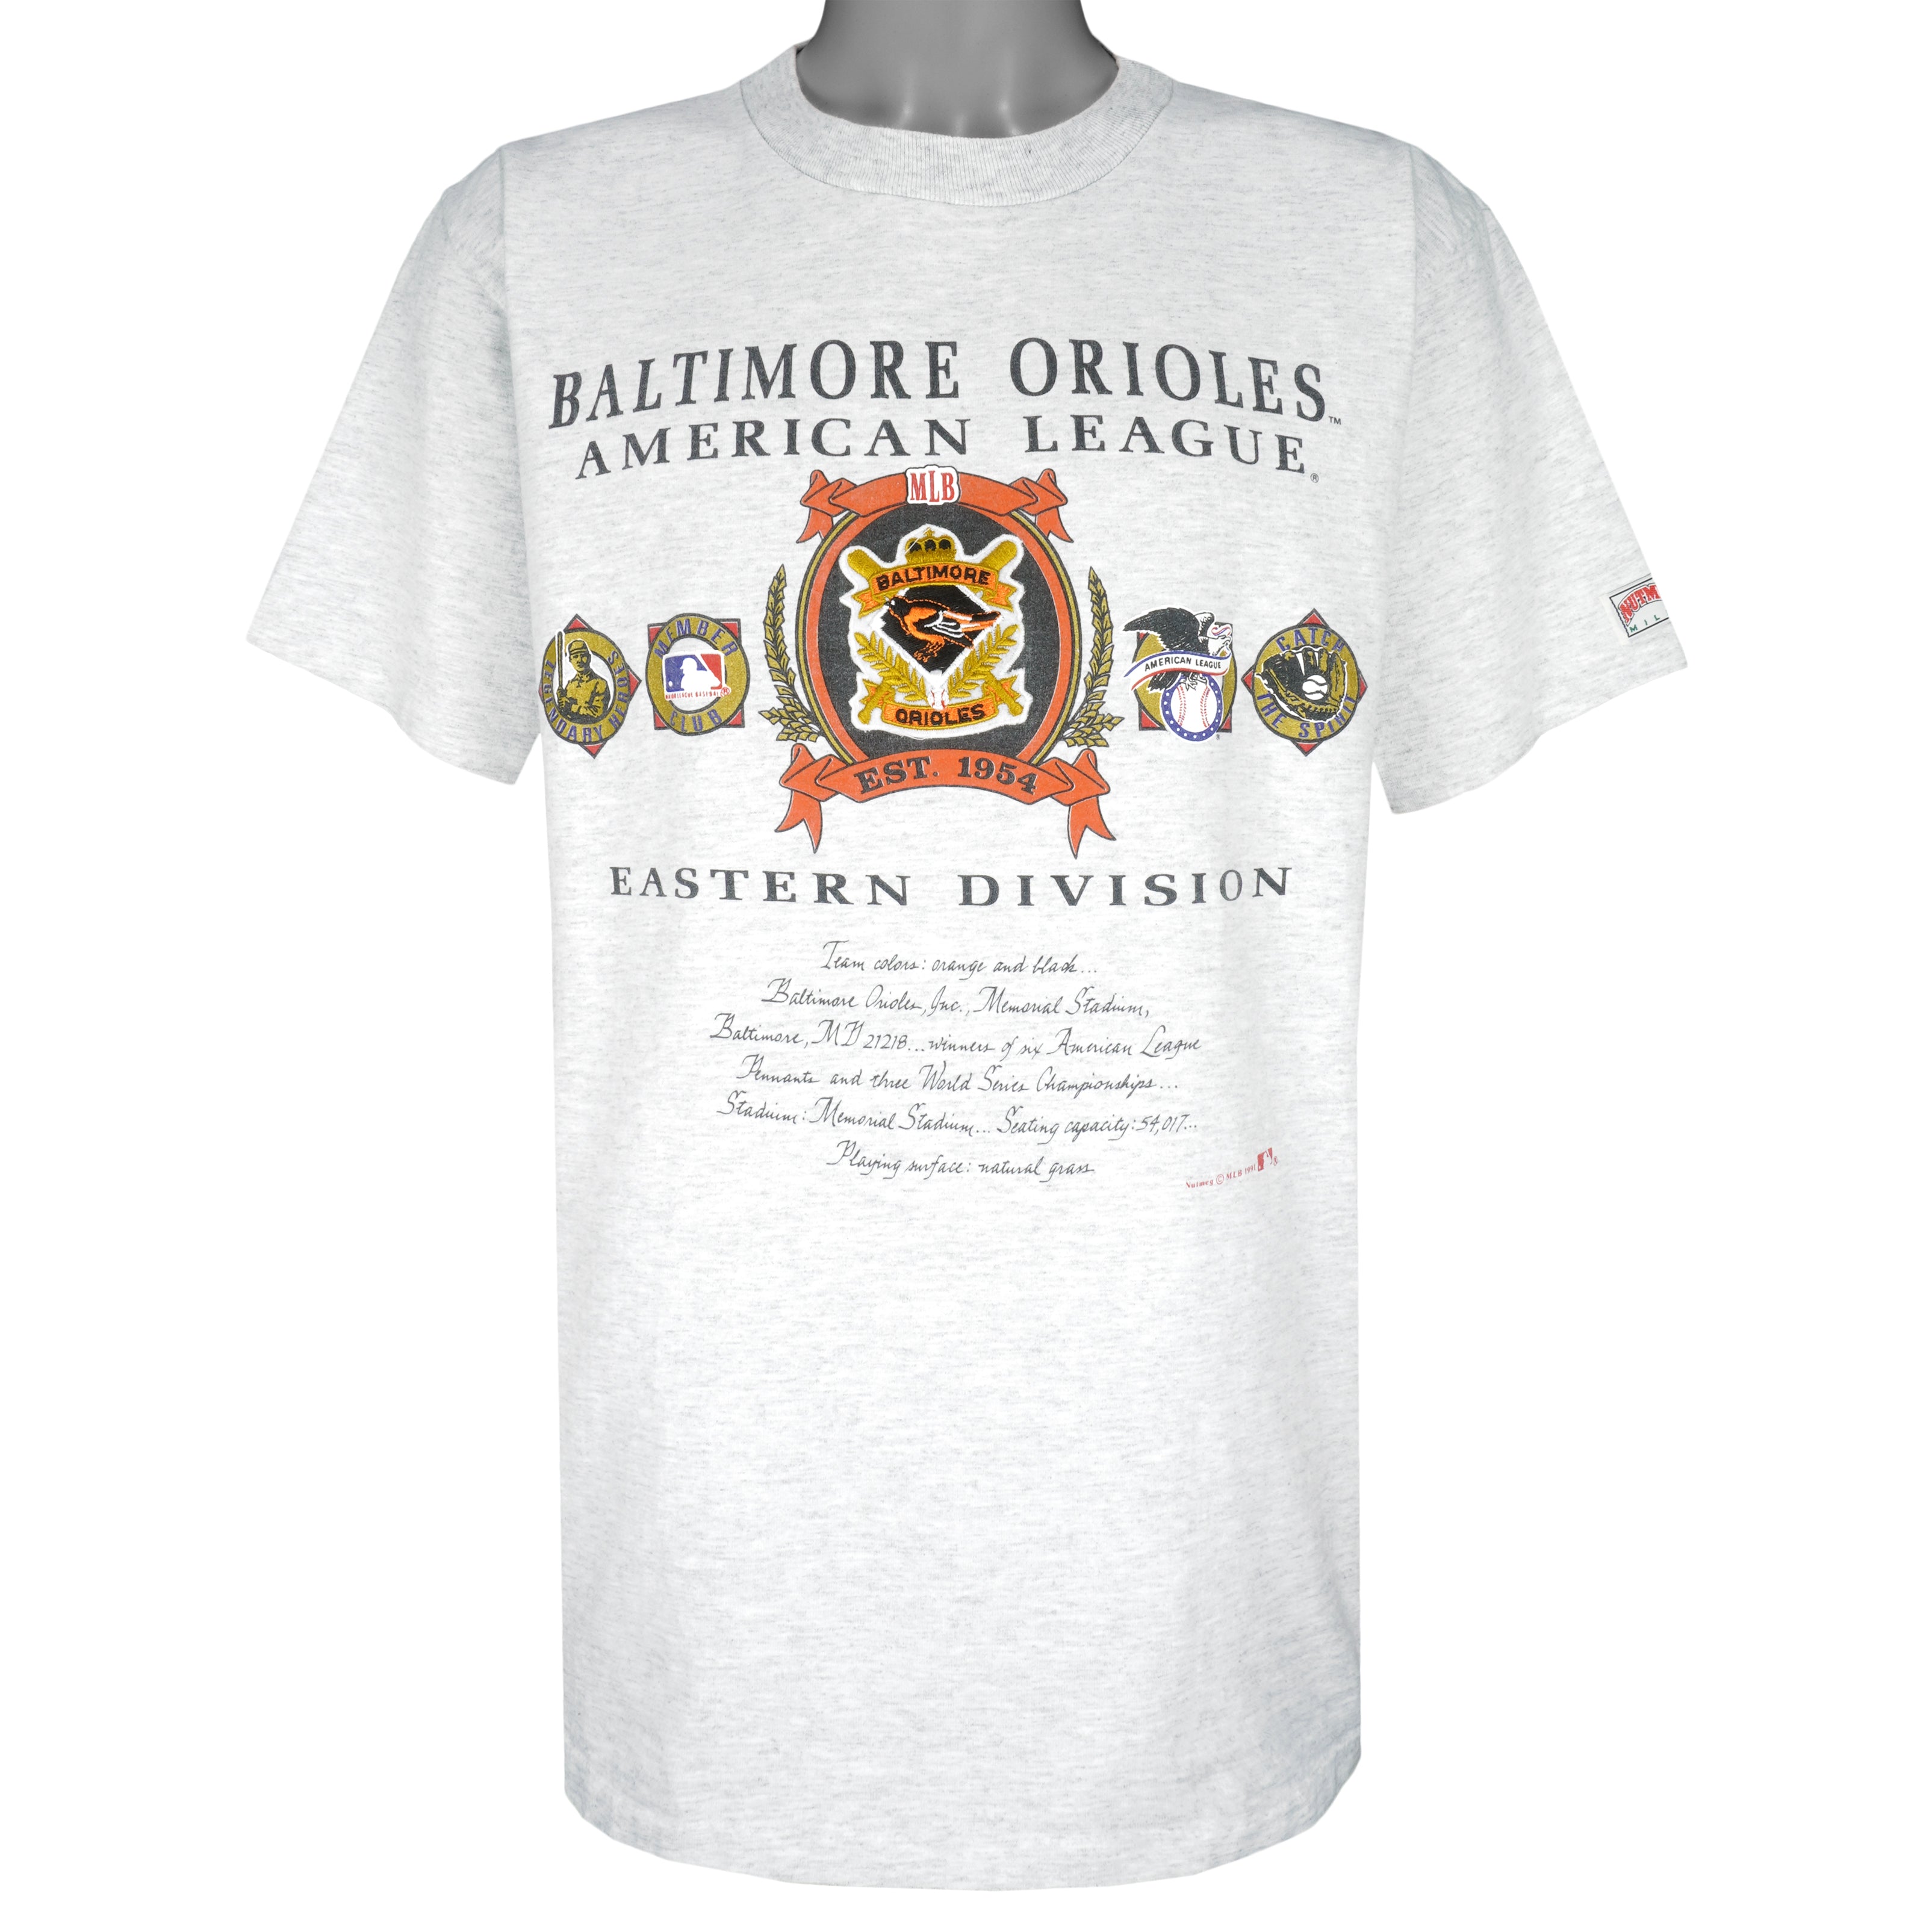 Baltimore Orioles T-Shirts in Baltimore Orioles Team Shop 